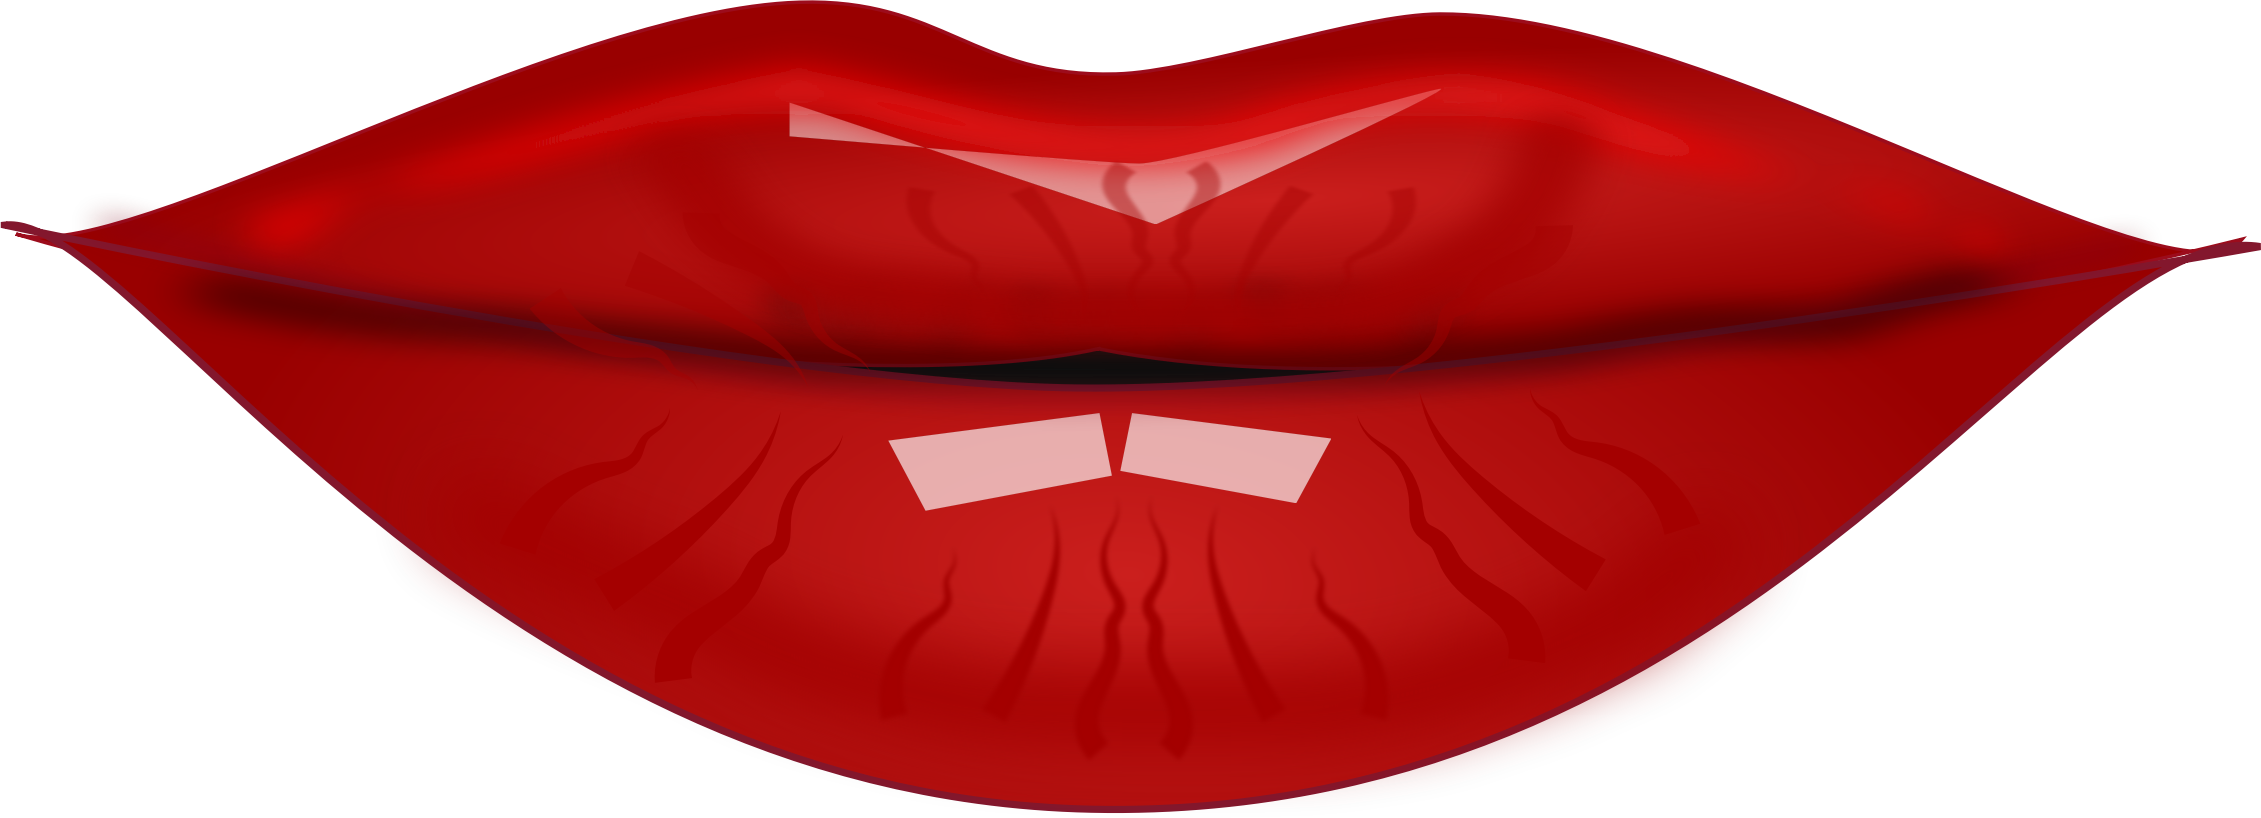 Lips Png Picture PNG Image